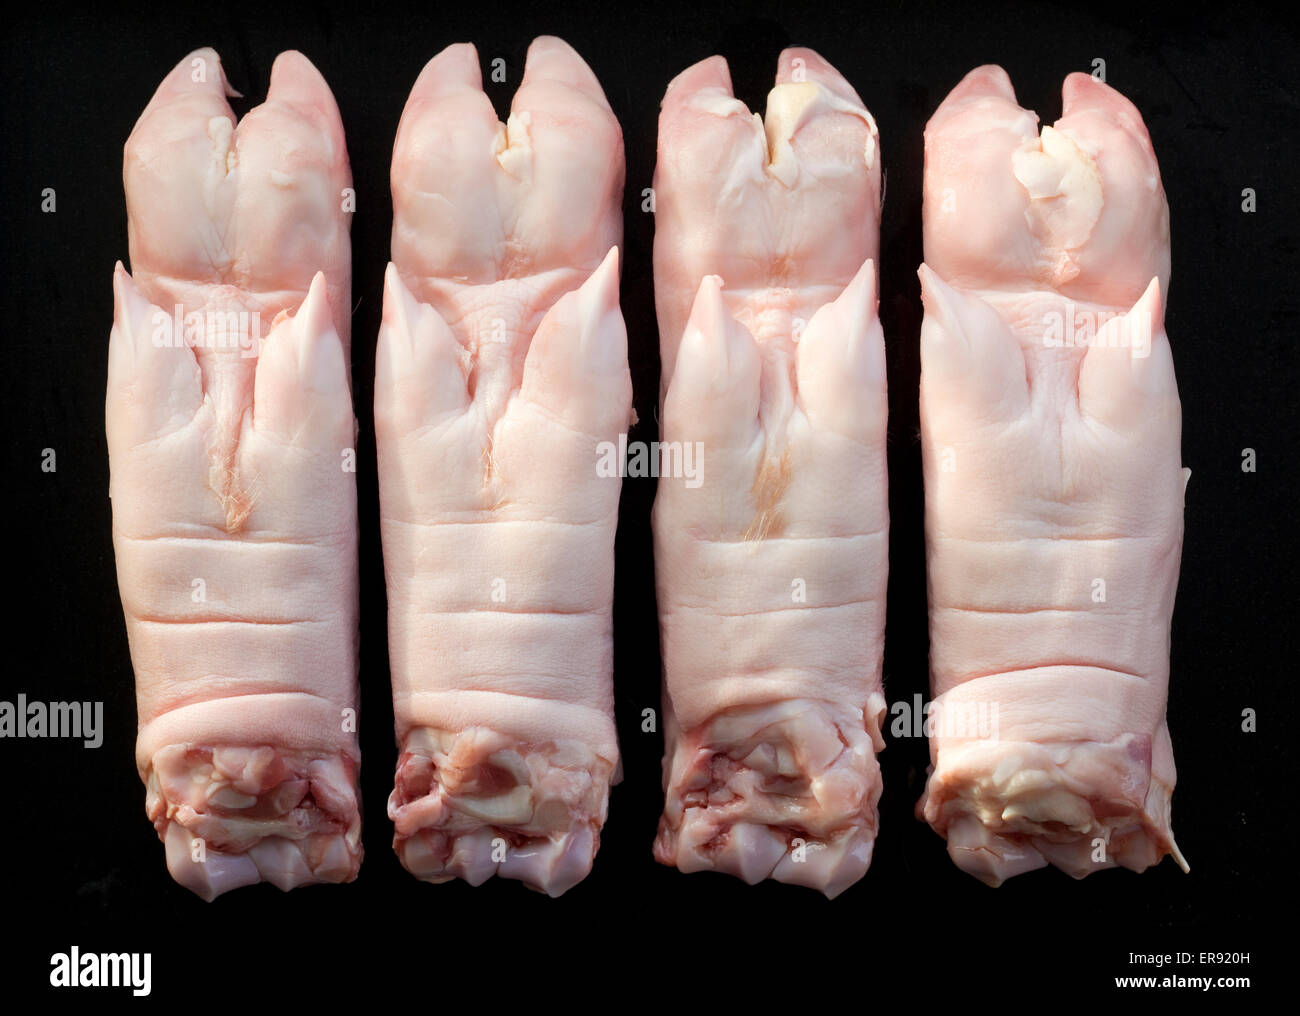 Raw Pigs Feet or Trotters Stock Photo